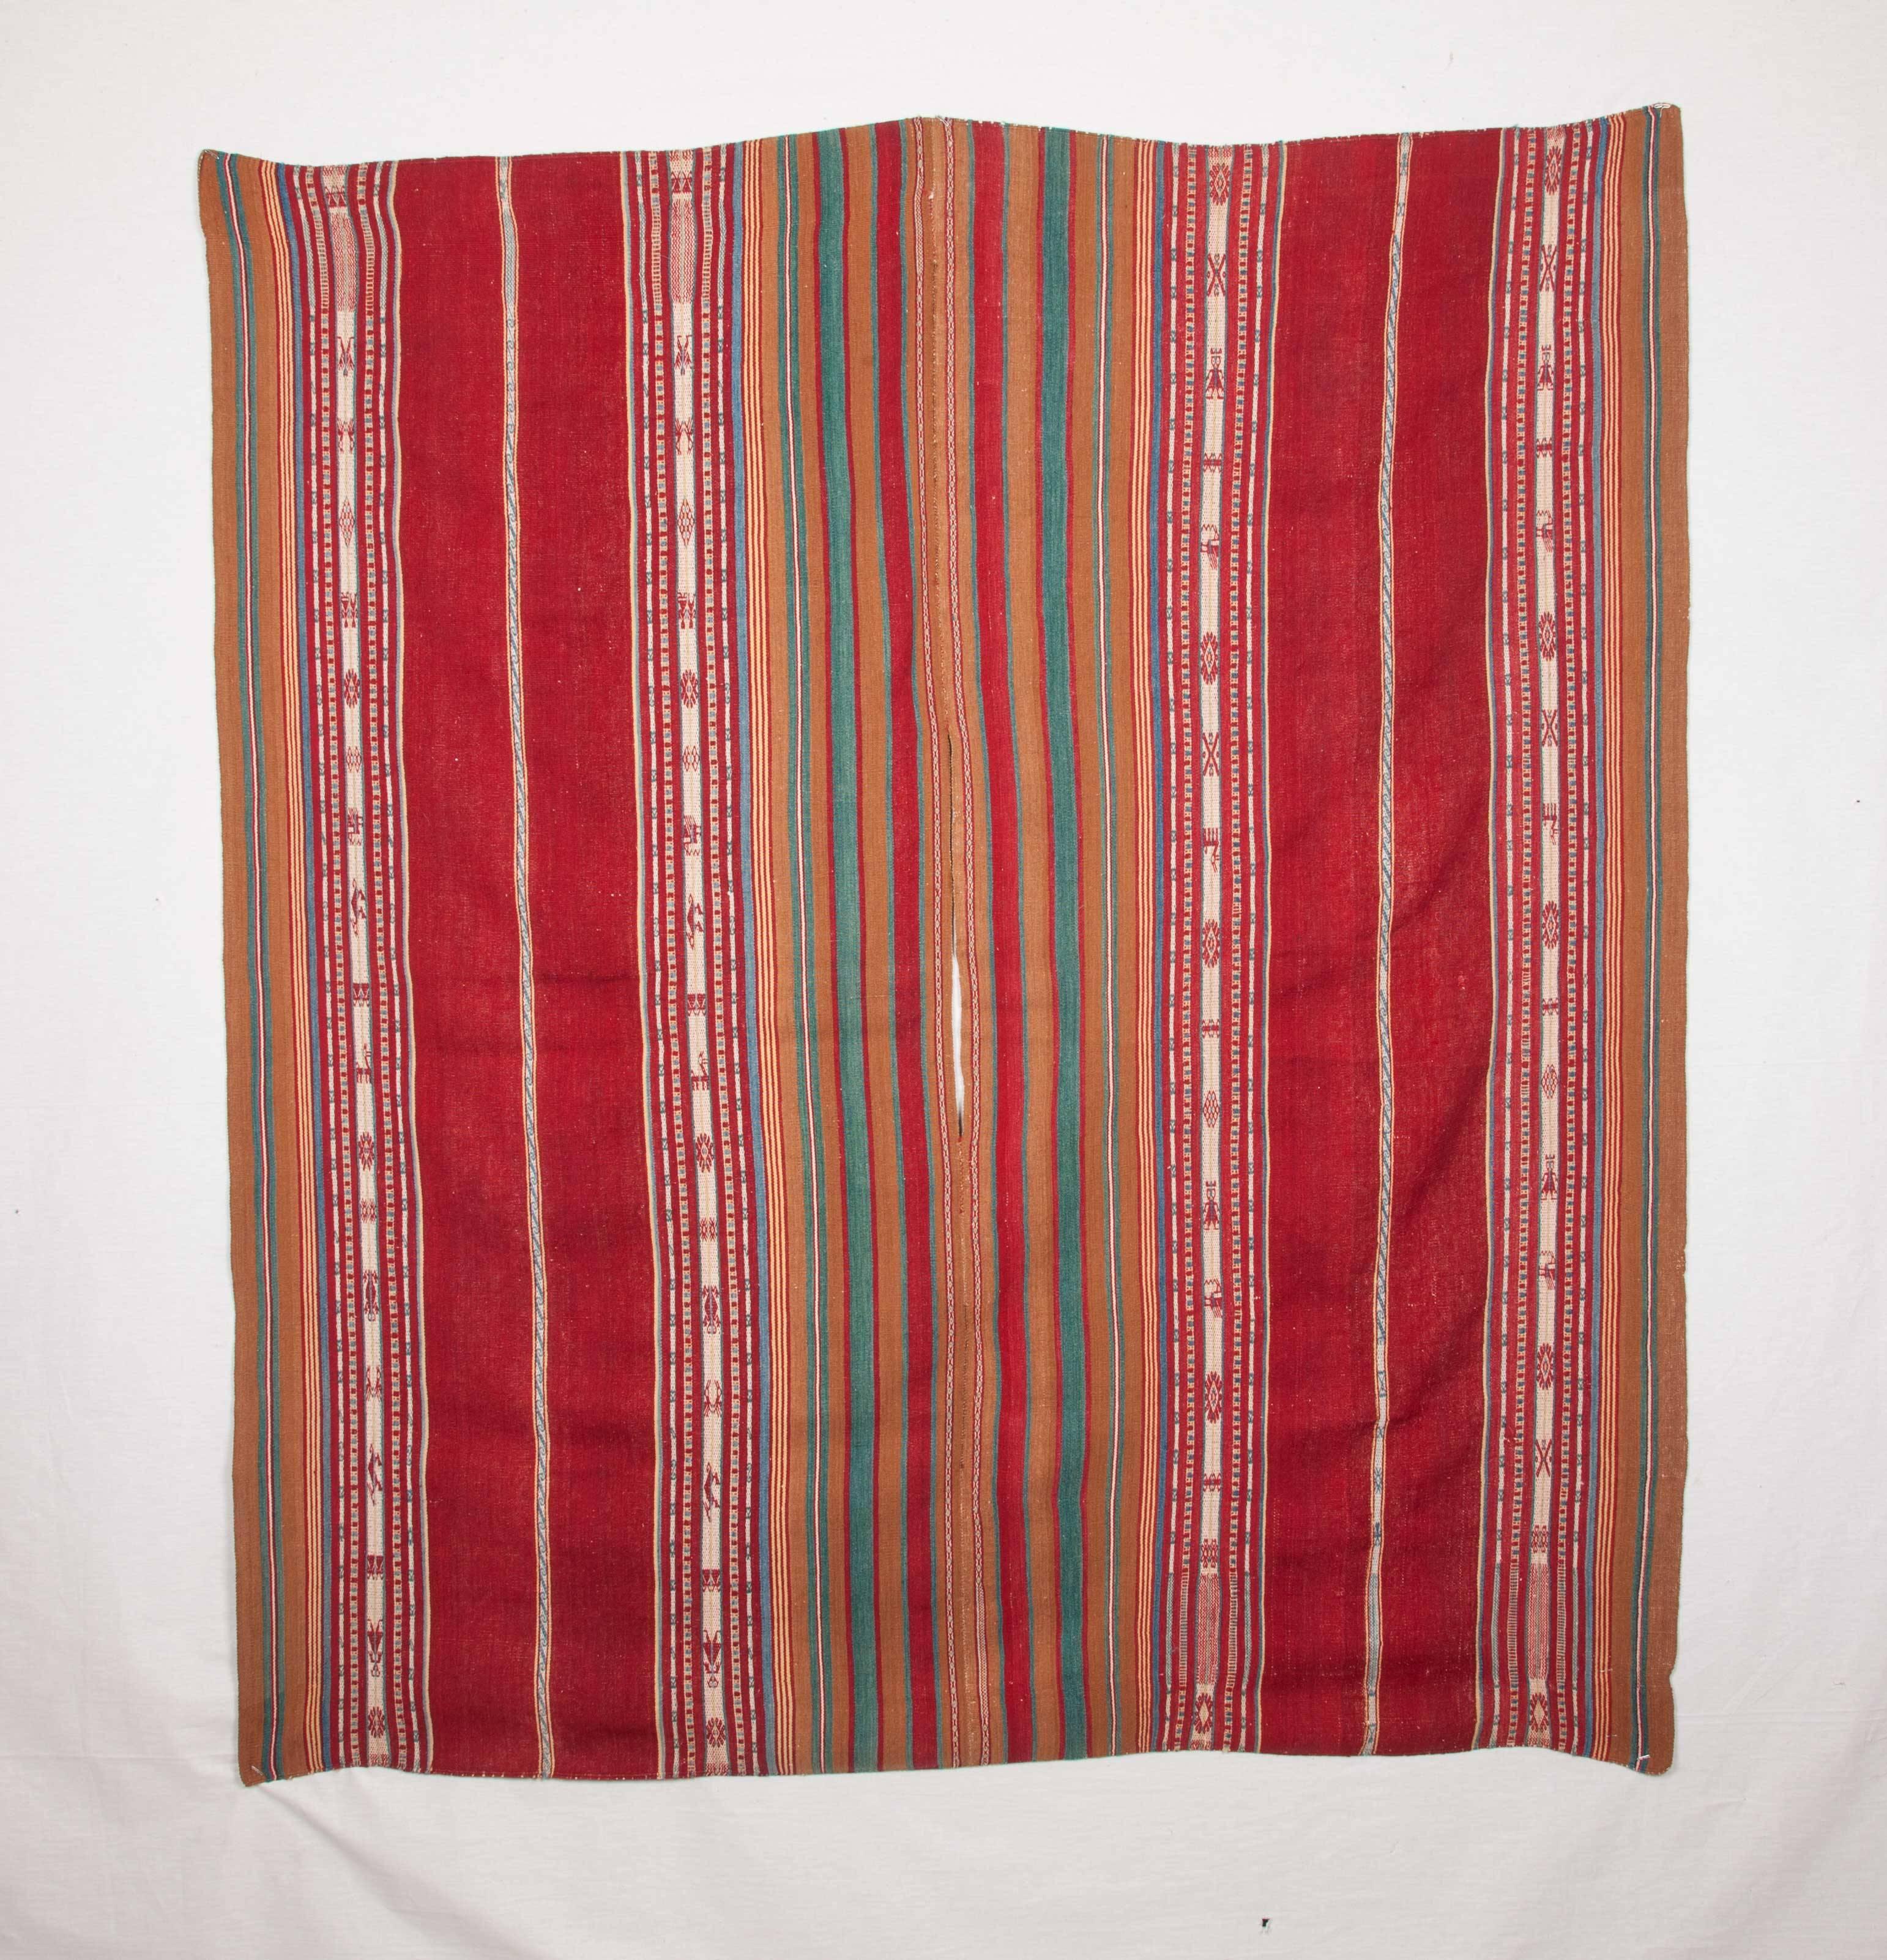 Late 19th early 20th century Poncho. In very good condition with very good colors.